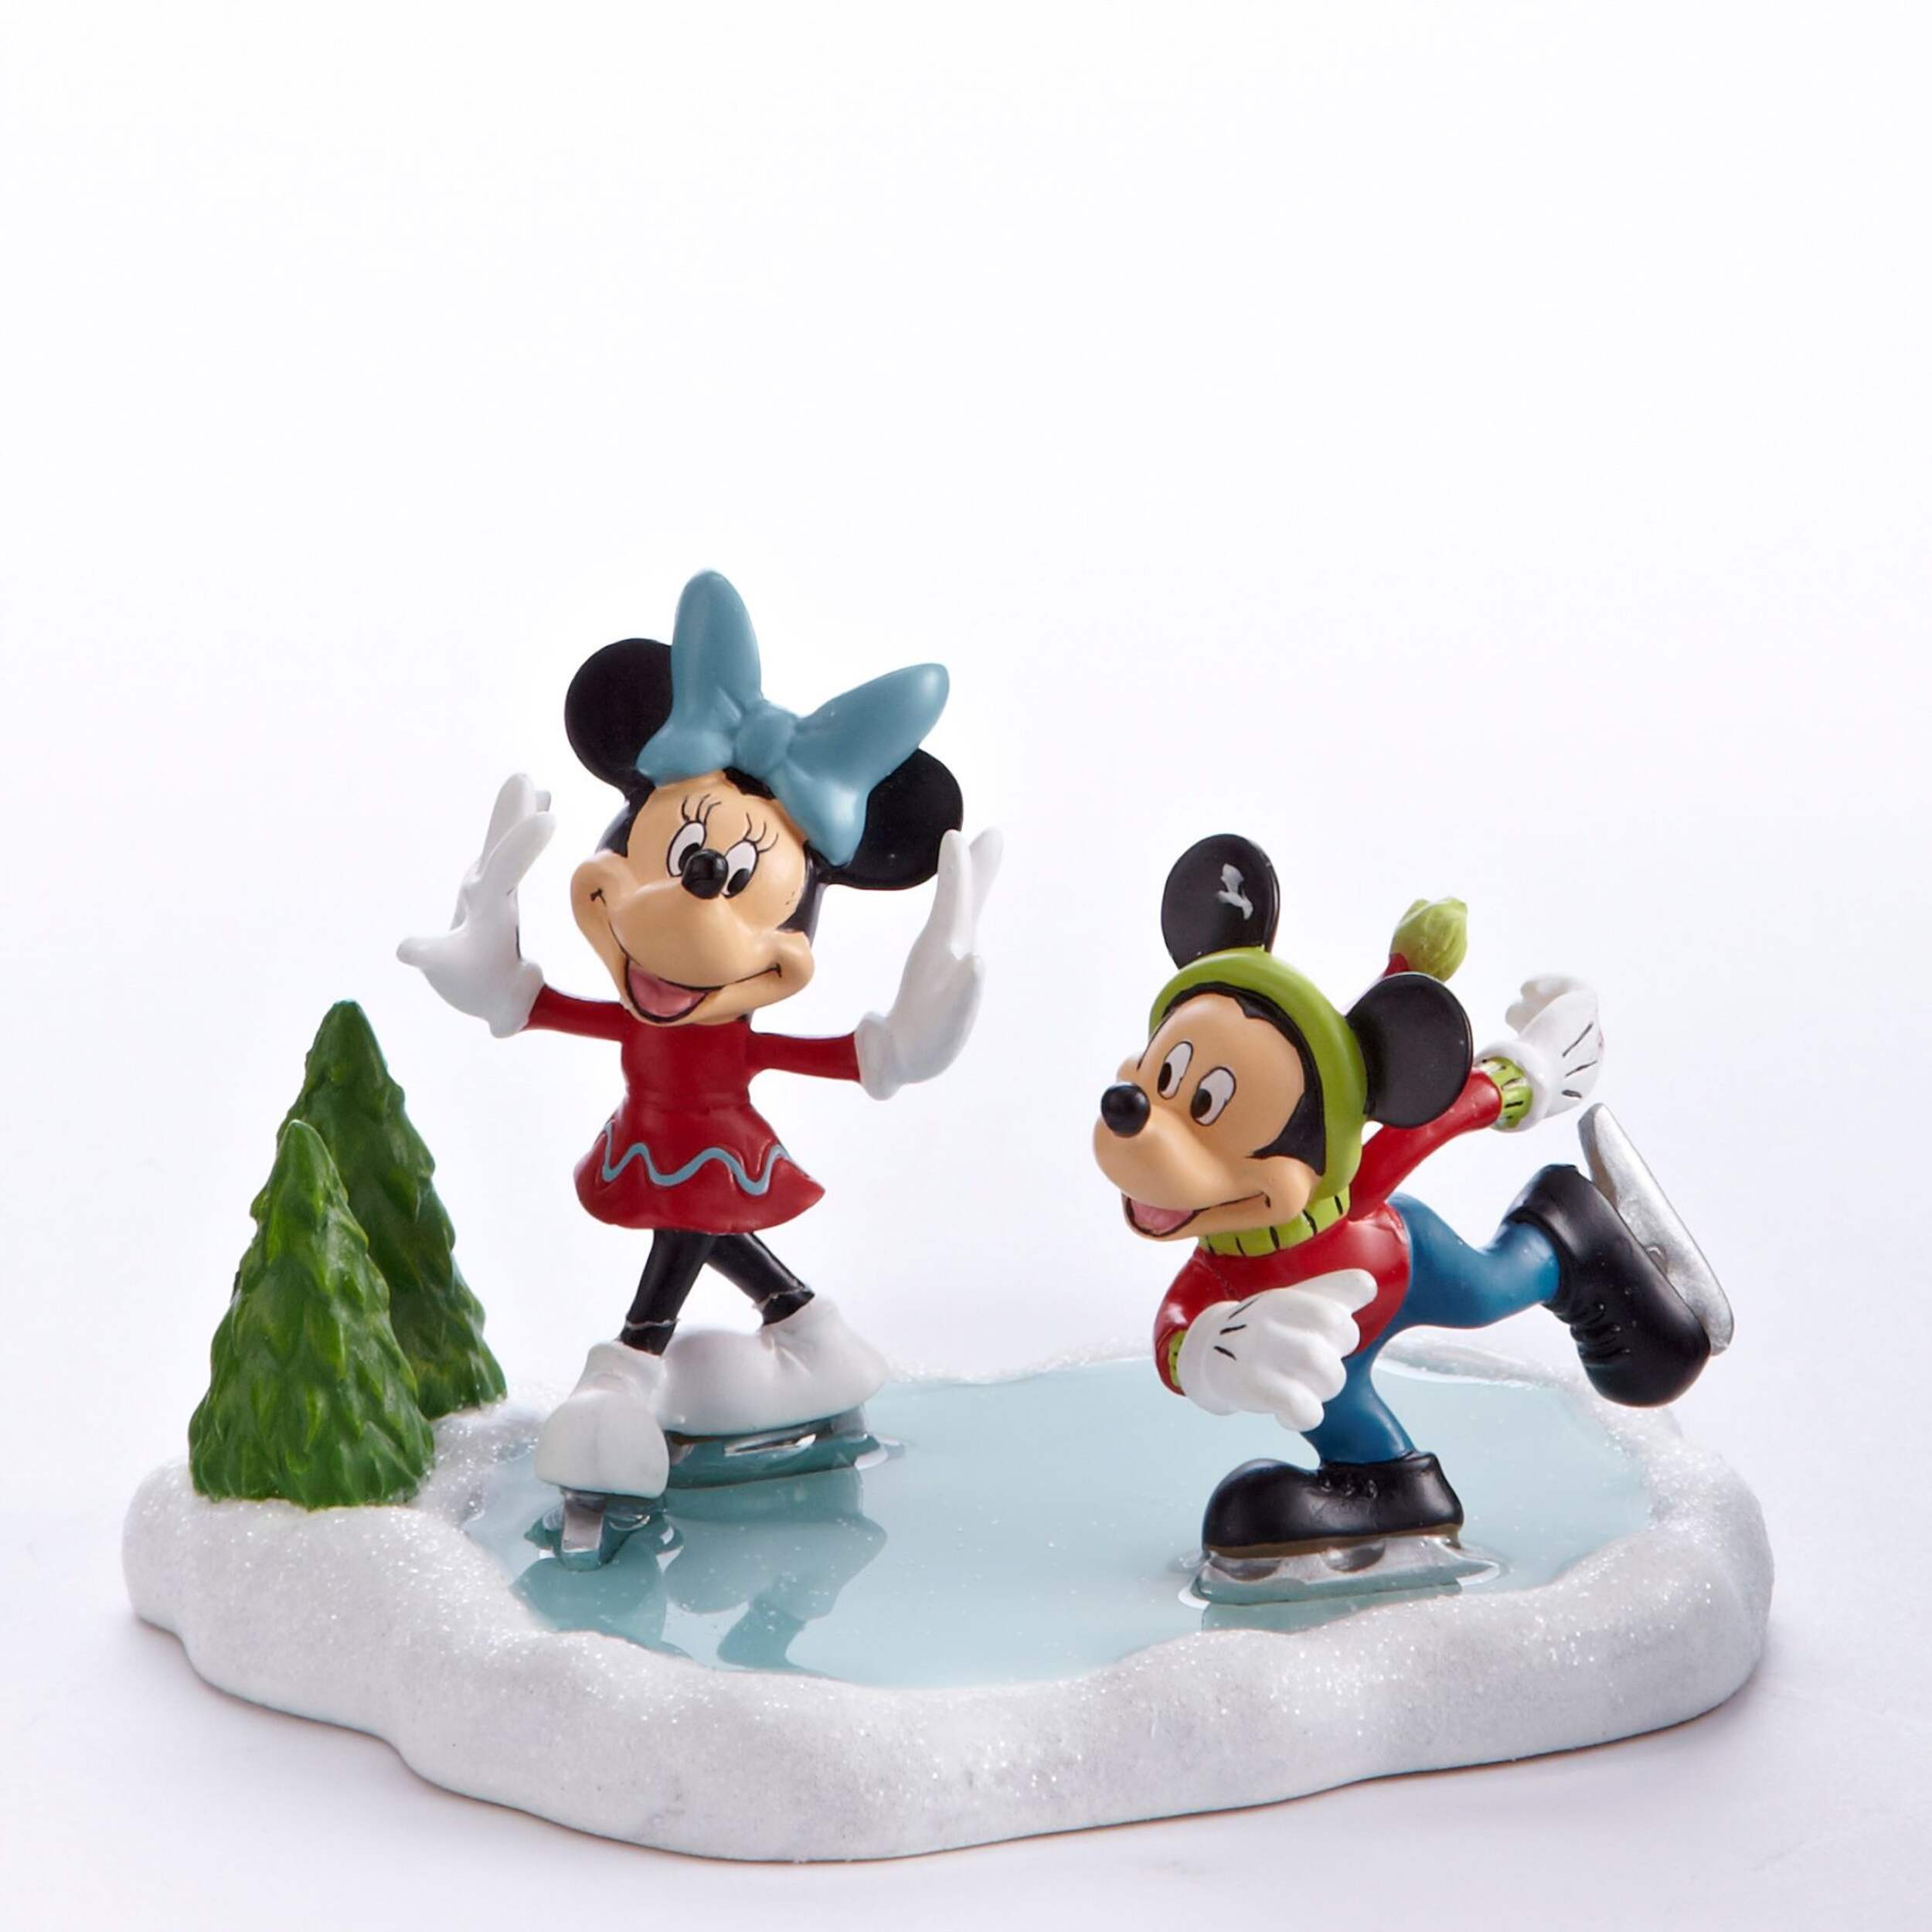 Disney Christmas Village Mickey and Minnie Skating Accessory | Canadian ...